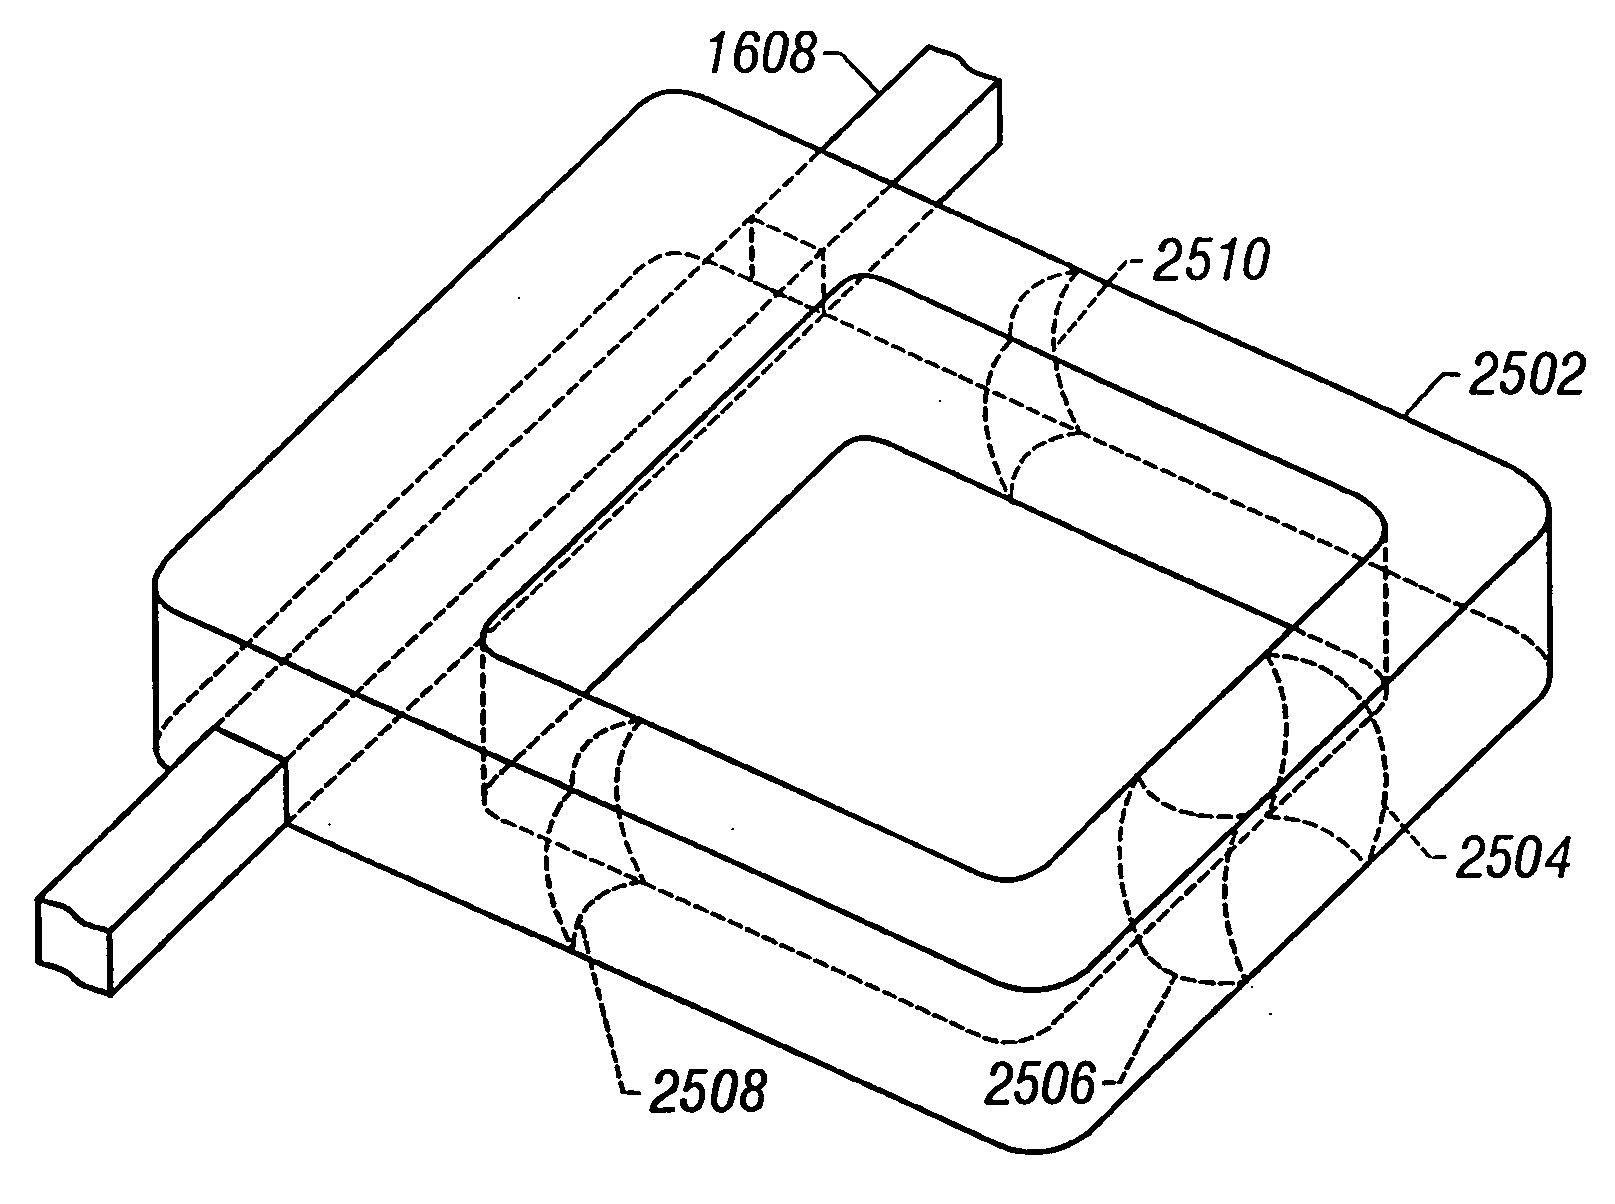 Microfluidic control for waveguide optical switches, variable attenuators, and other optical devices